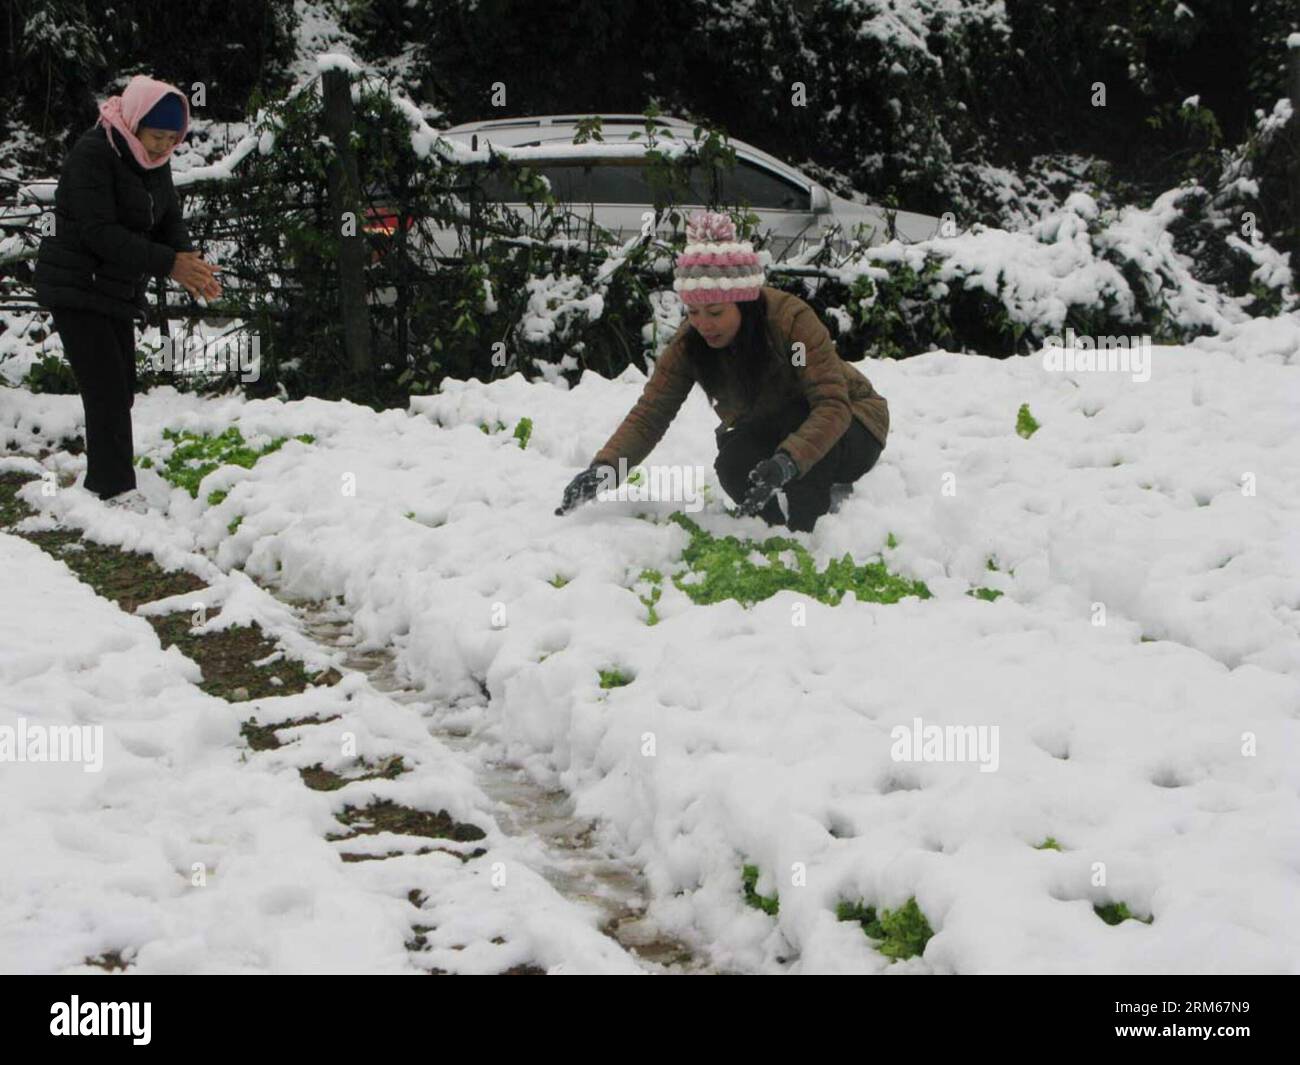 HANOI, Dec. 16, 2013 (Xinhua) -- People remove snow on vegetables in Sa Pa county of Vietnam s northern Lao Cai province, some 250 km northwest of capital Hanoi, Dec. 16, 2013. According to statistics from Sa Pa Department of Agriculture and Rural Development, over 200 hectares of vegetables and flowers were destroyed by heavy snowfall in the past two days. (Xinhua/VNA) VIETNAM-LAO CAI-SA PA-SNOWFALL PUBLICATIONxNOTxINxCHN   Hanoi DEC 16 2013 XINHUA Celebrities REMOVE Snow ON Vegetables in Sat PA County of Vietnam S Northern LAO Cai Province Some 250 km Northwest of Capital Hanoi DEC 16 2013 A Stock Photo